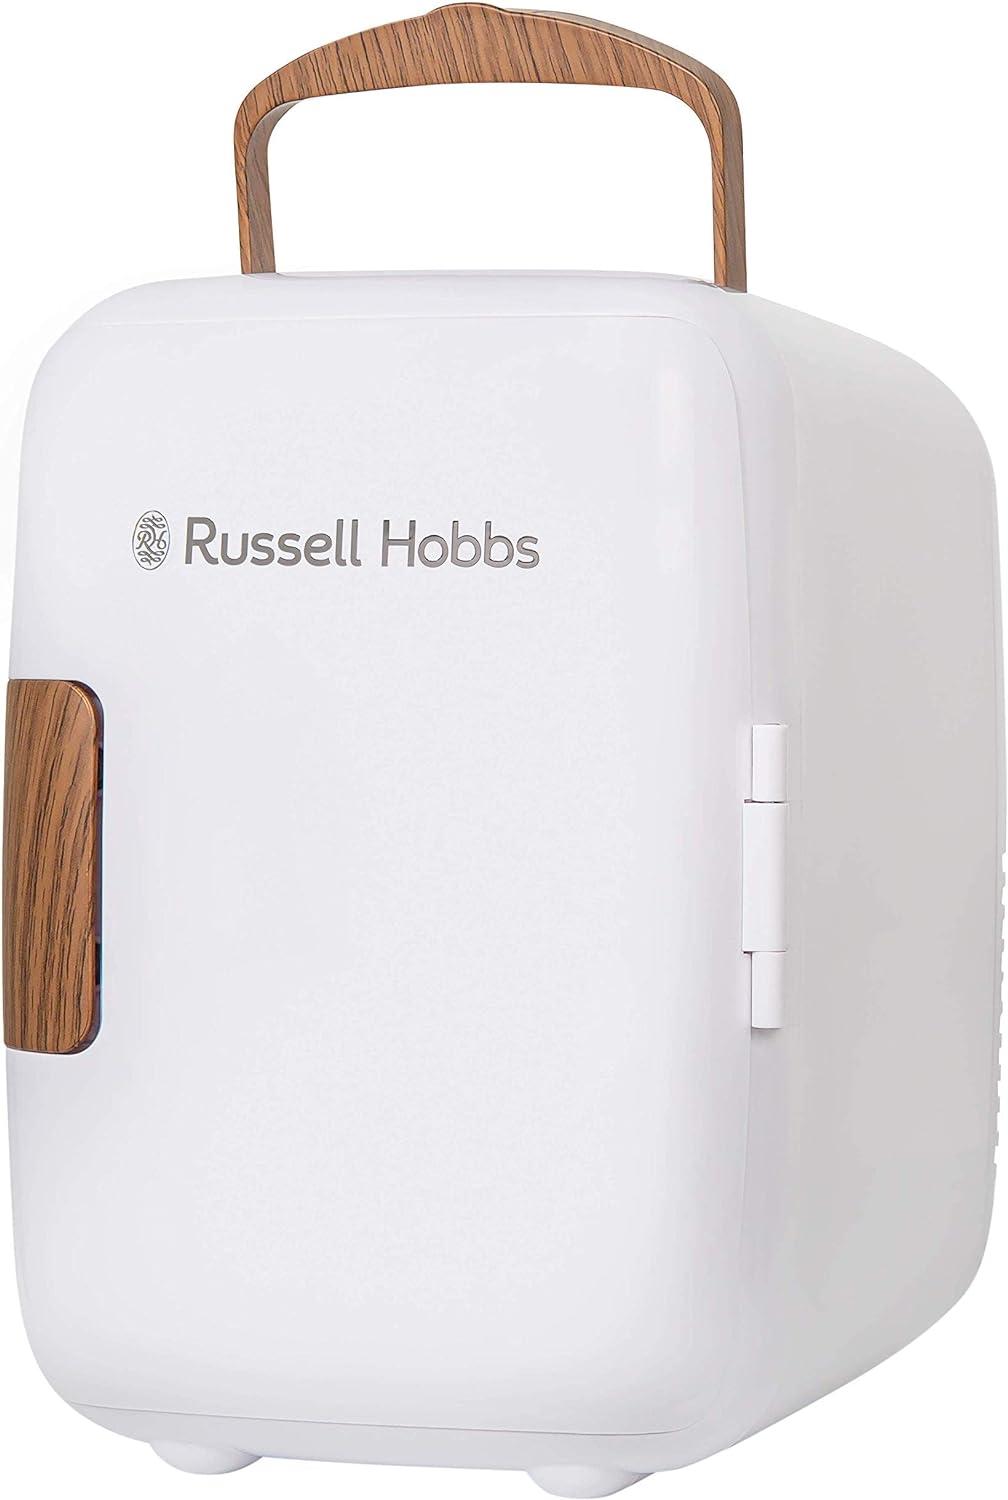 Russell Hobbs Mini Cooler 4L 6 Cans Portable